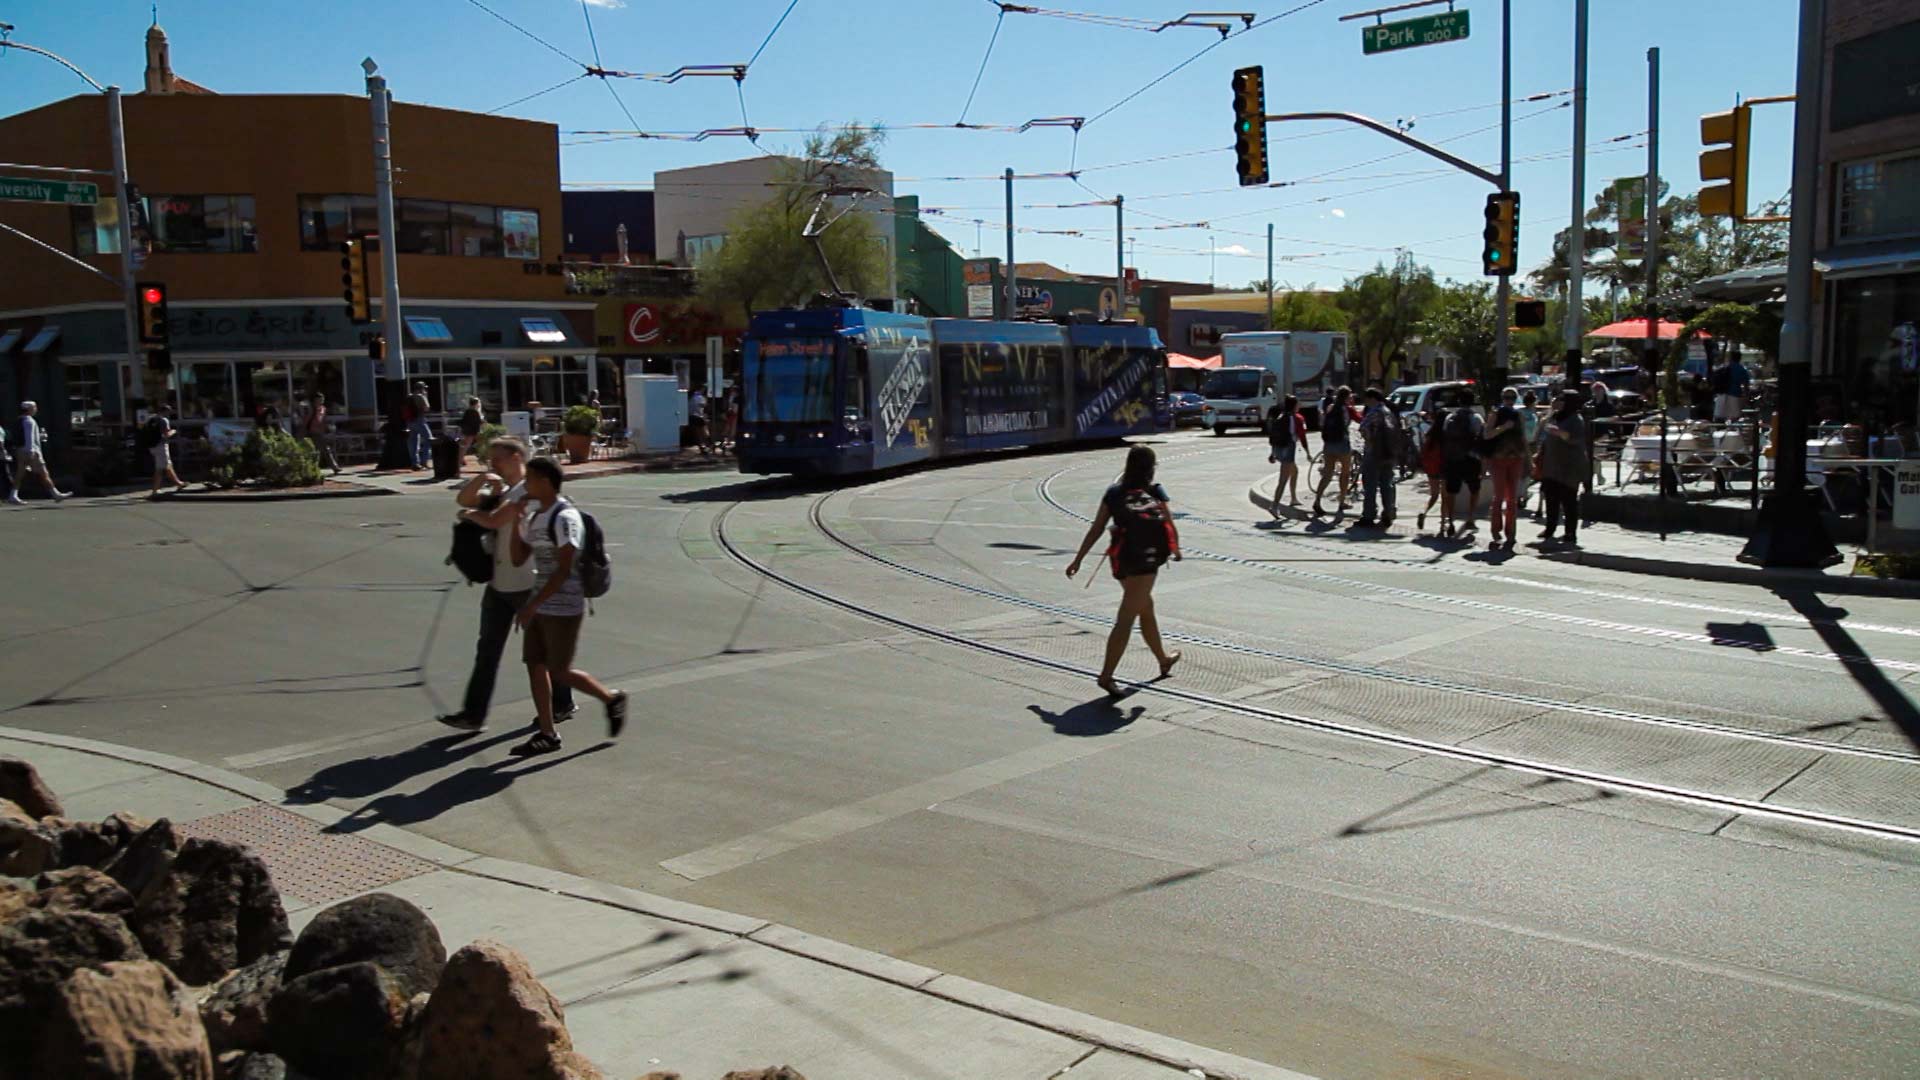 Tucson's streetcar passes by Main Gate Square, at the University of Arizona Campus.